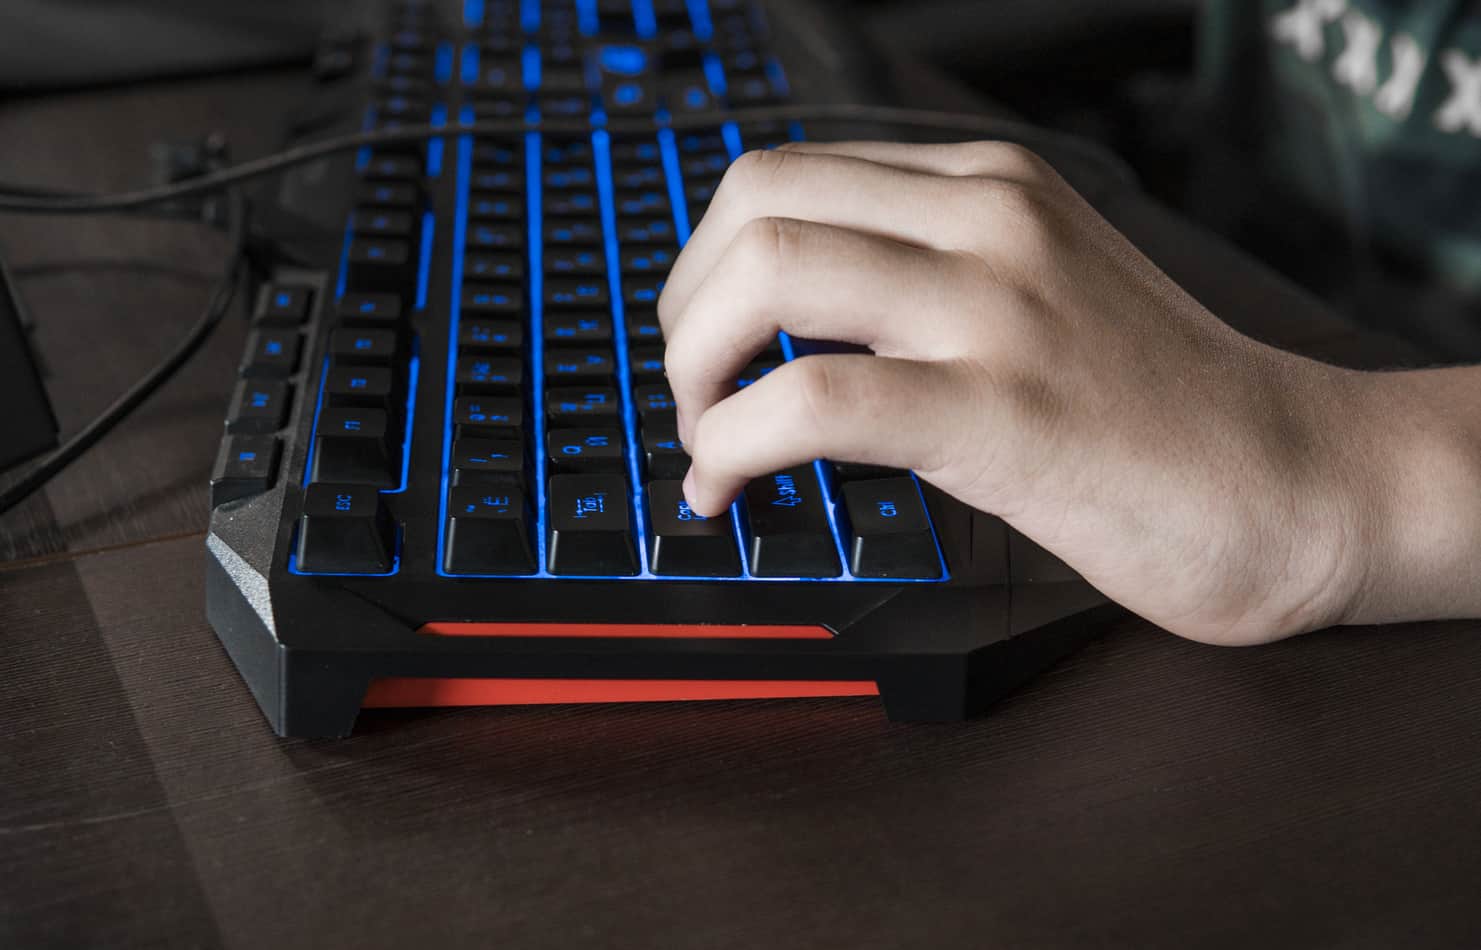 How To Use A Mechanical Keyboard In Fortnite Without A Mouse